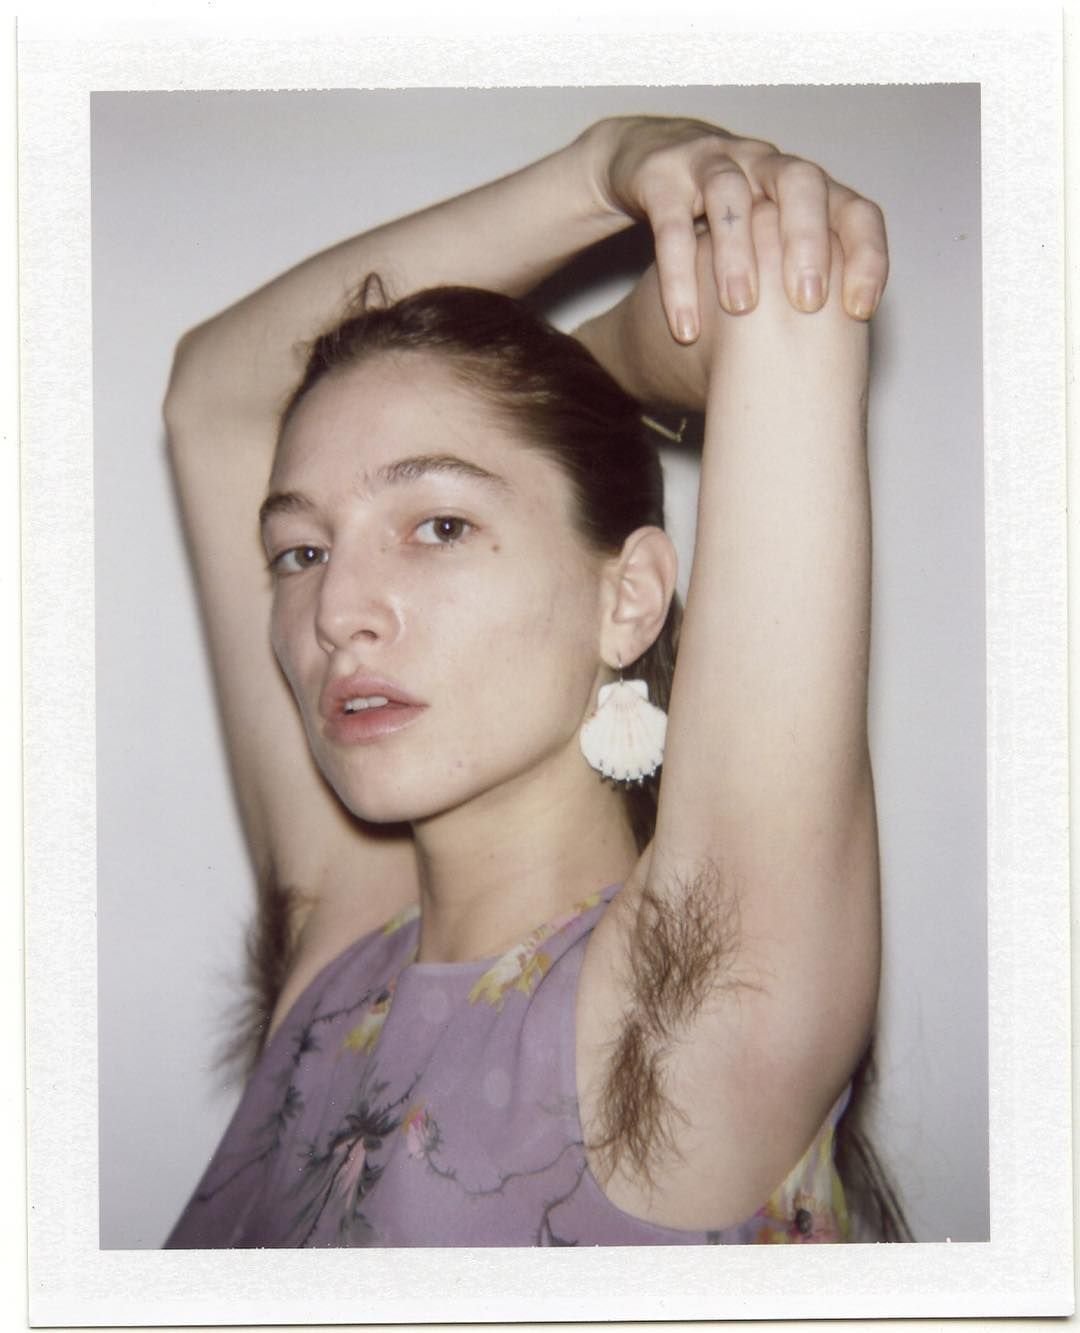 Hairy Armpits Girls picture